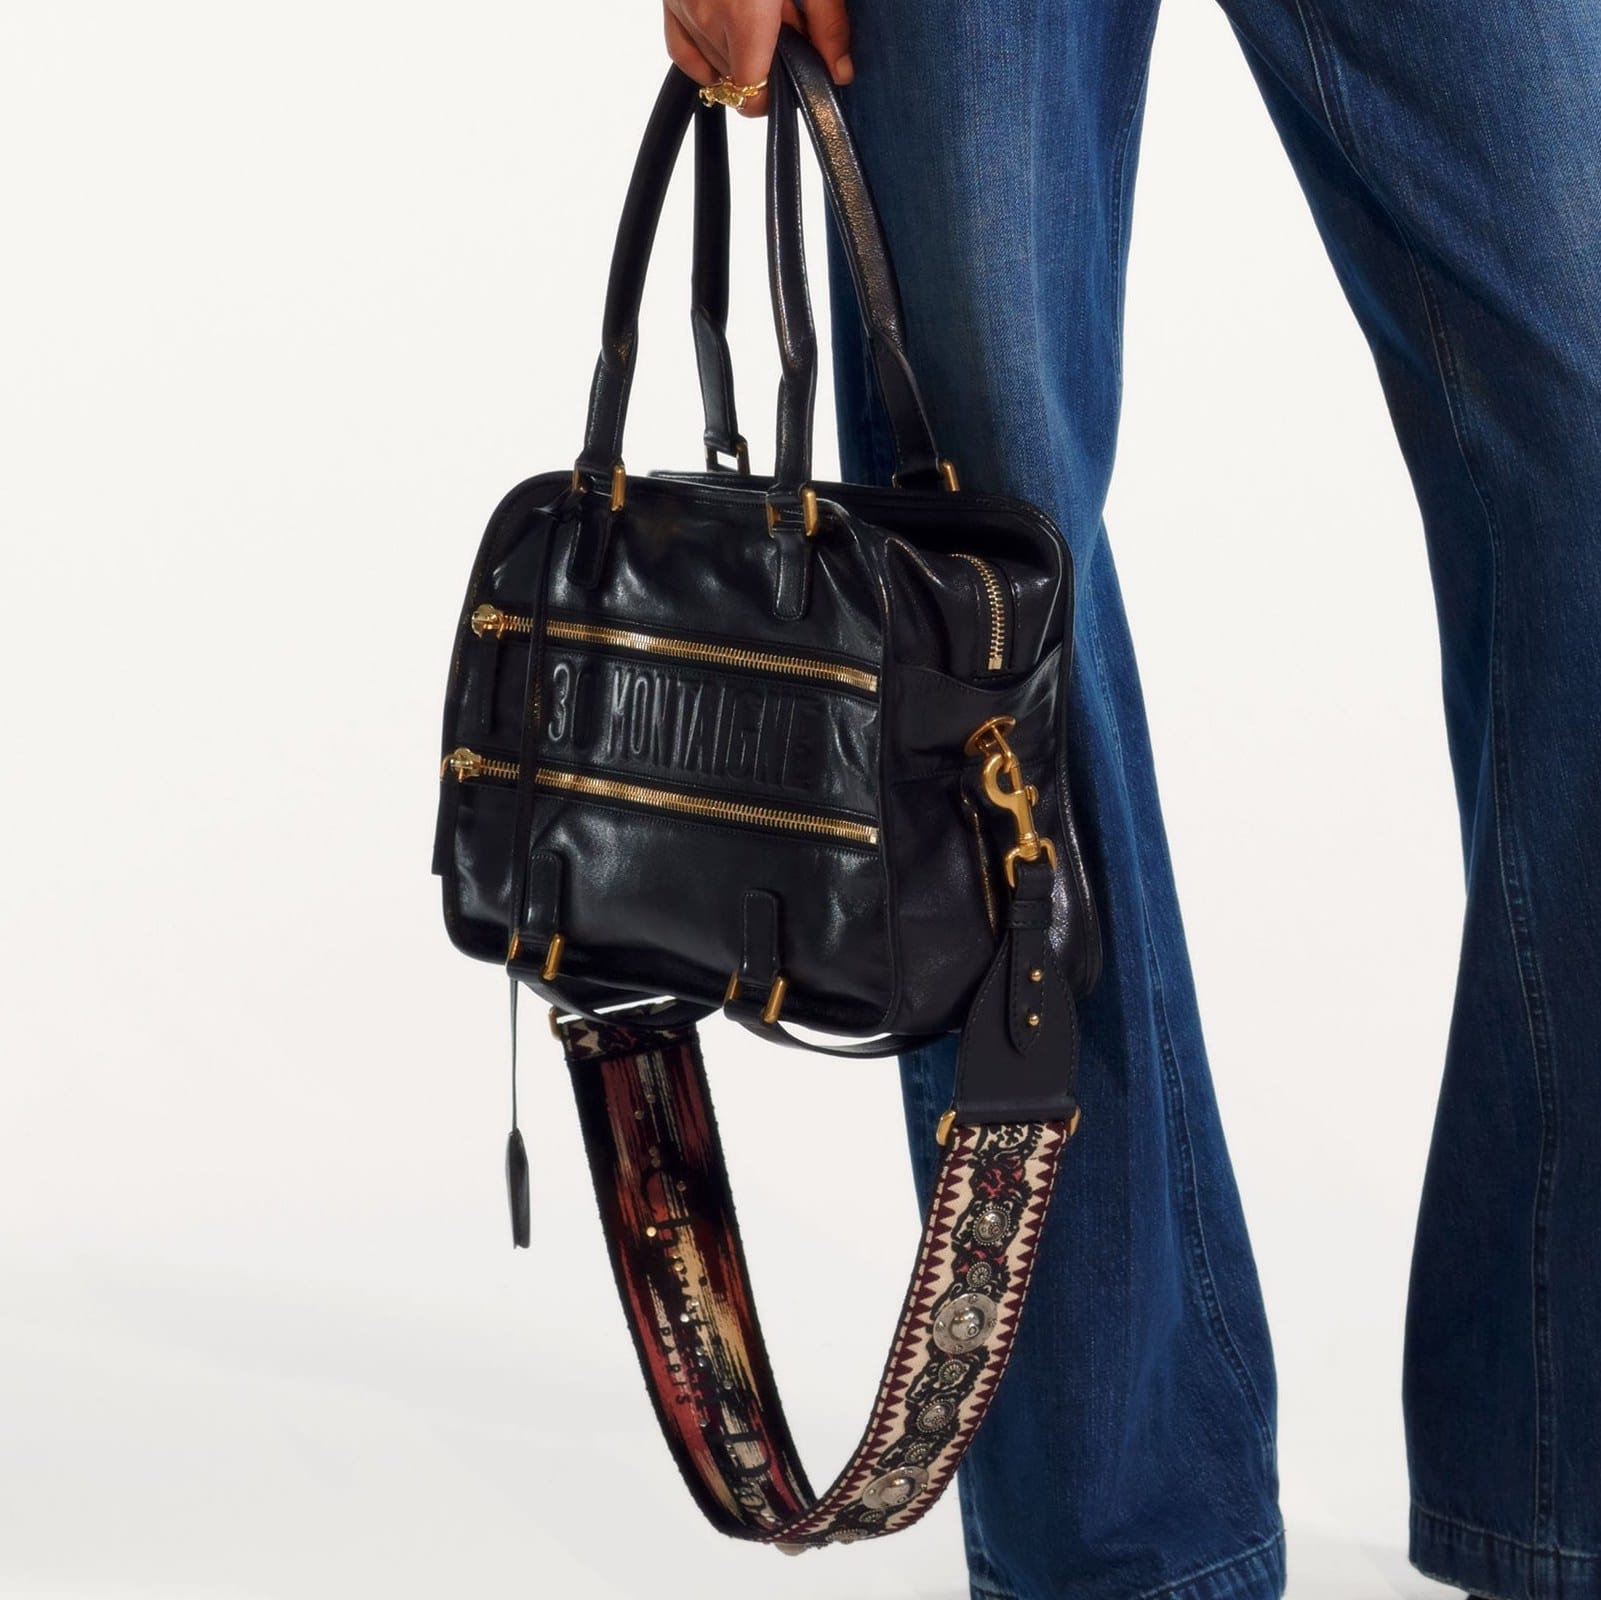 Dior Pre-Fall 2019 Bag Collection Features Snakeskin Flap Bags | Spotted Fashion